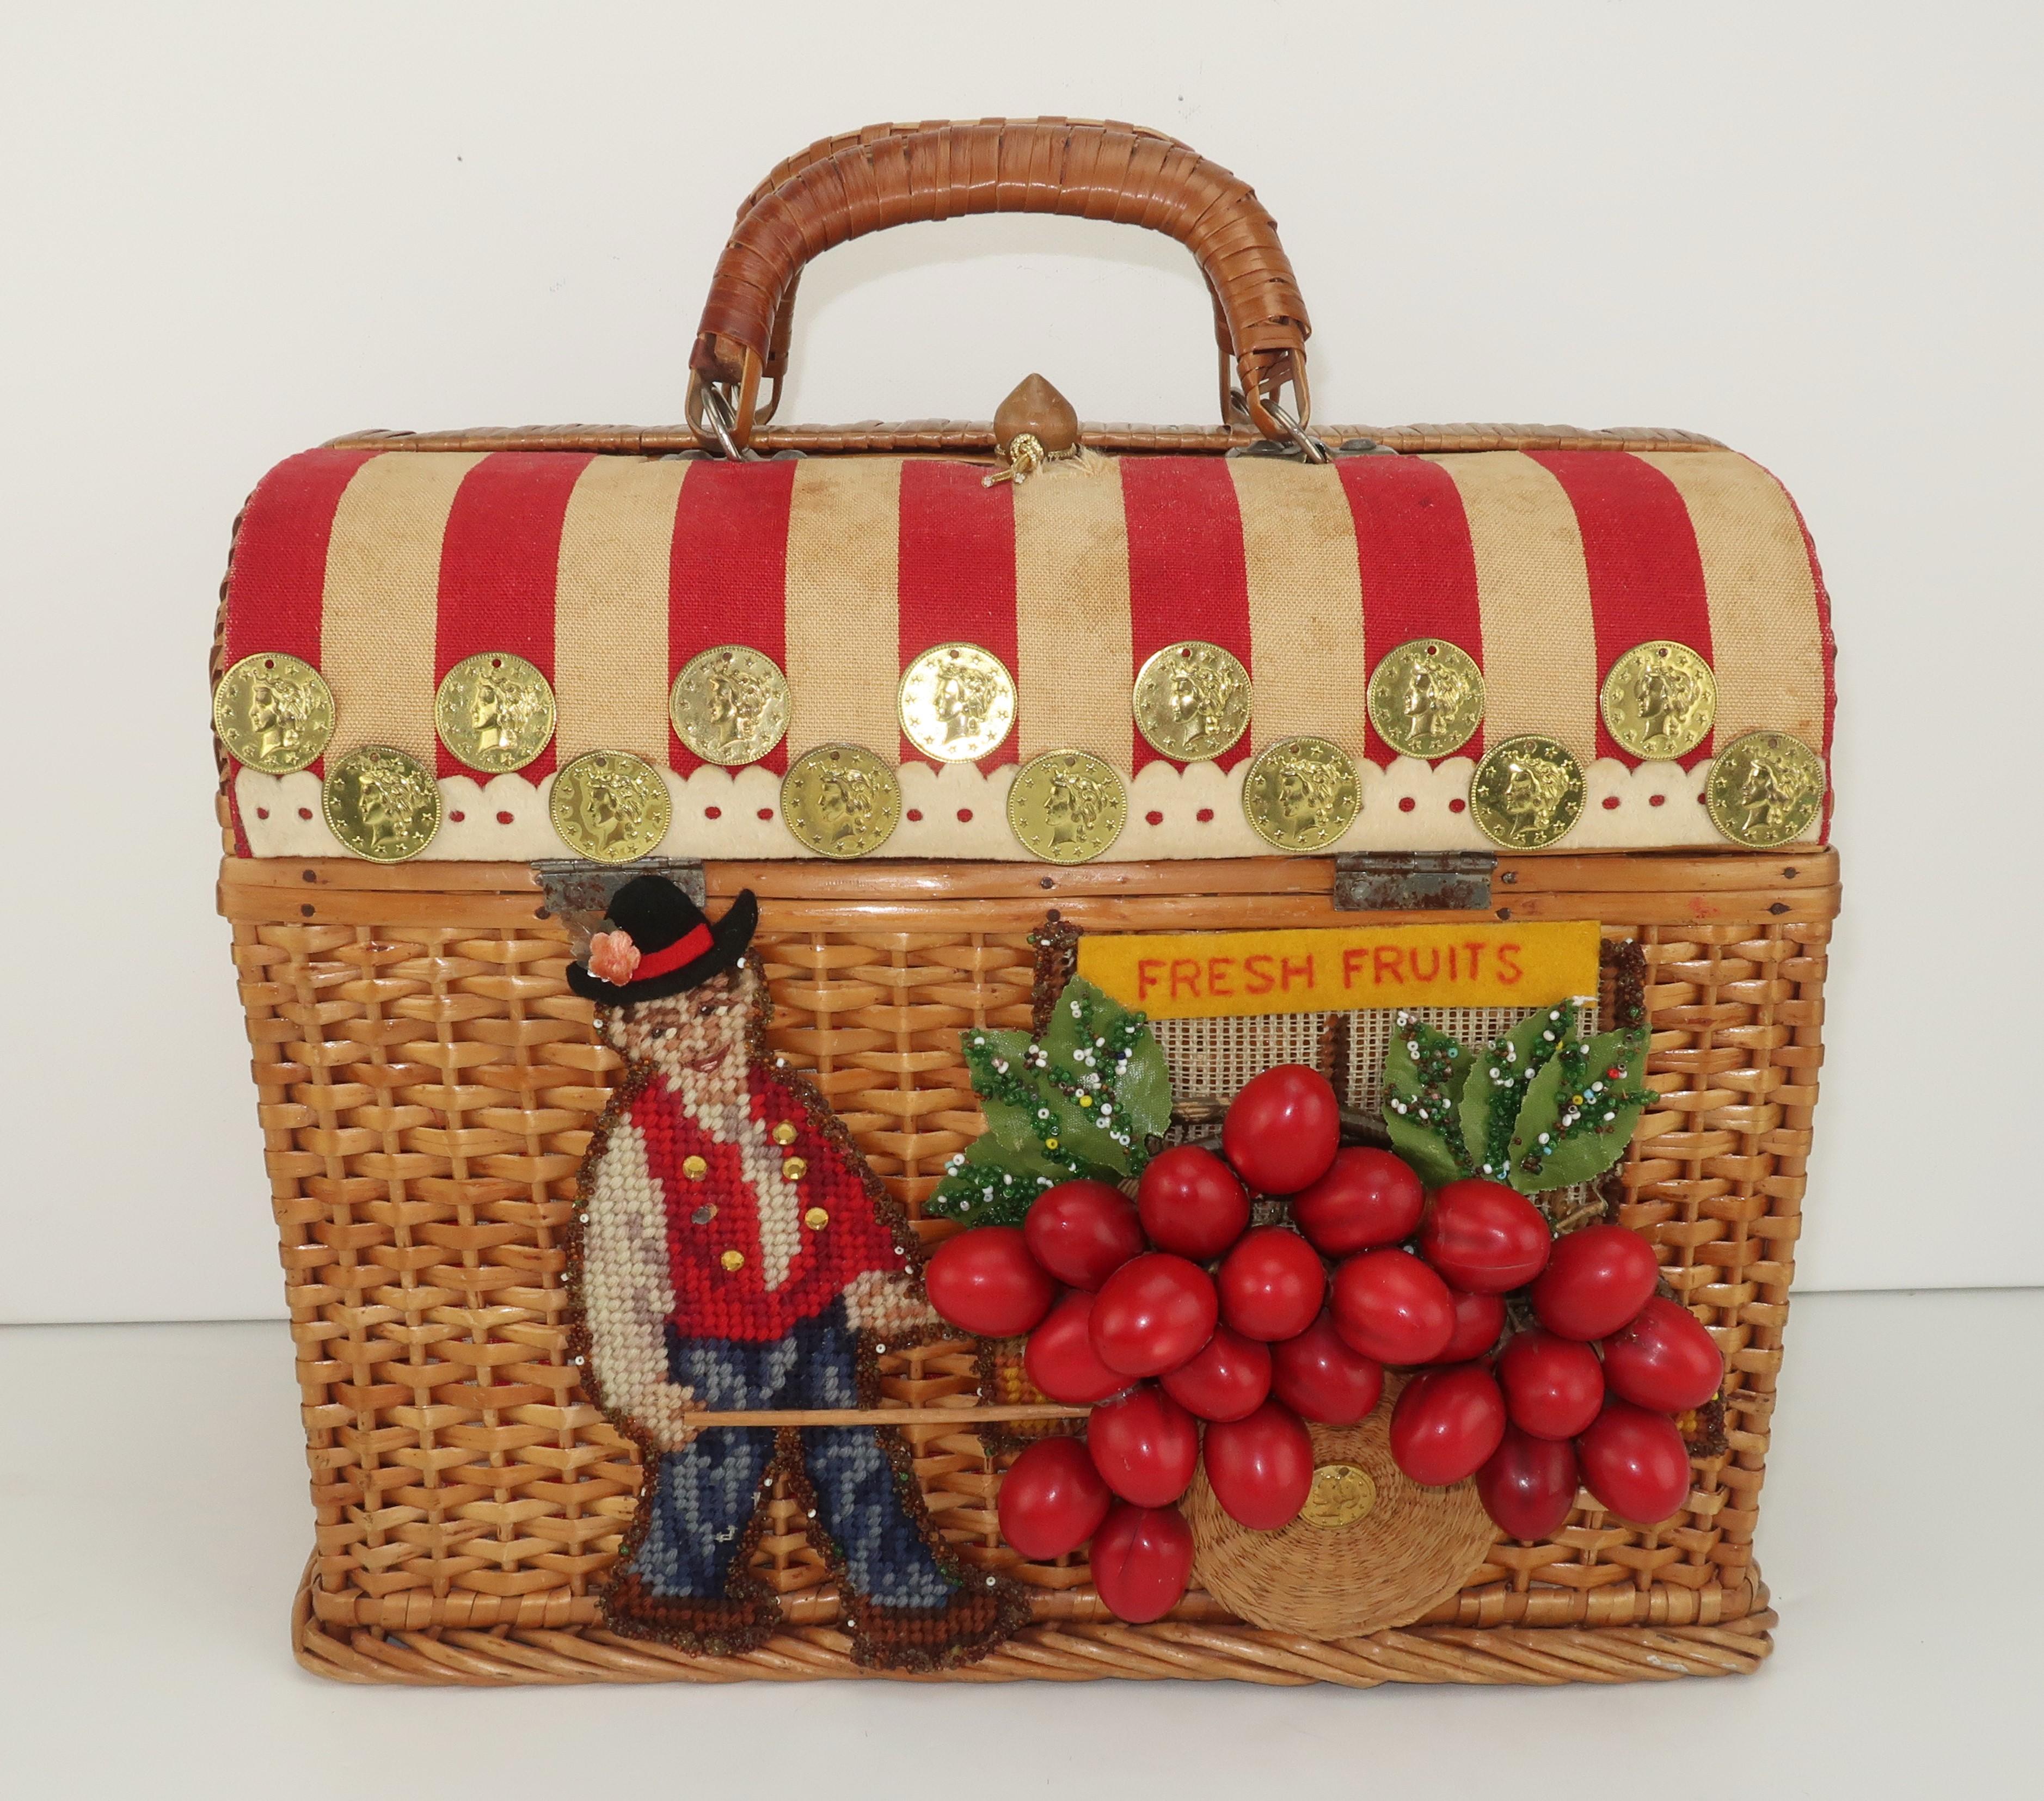 Get your fresh fruits here!  And your novelty handbags!  This 1950's charmer is by Jolles Original of Austria.  Jolles has quite a storied history in the world of 20th century handbag design both due to the artistic mastery of their handmade petit